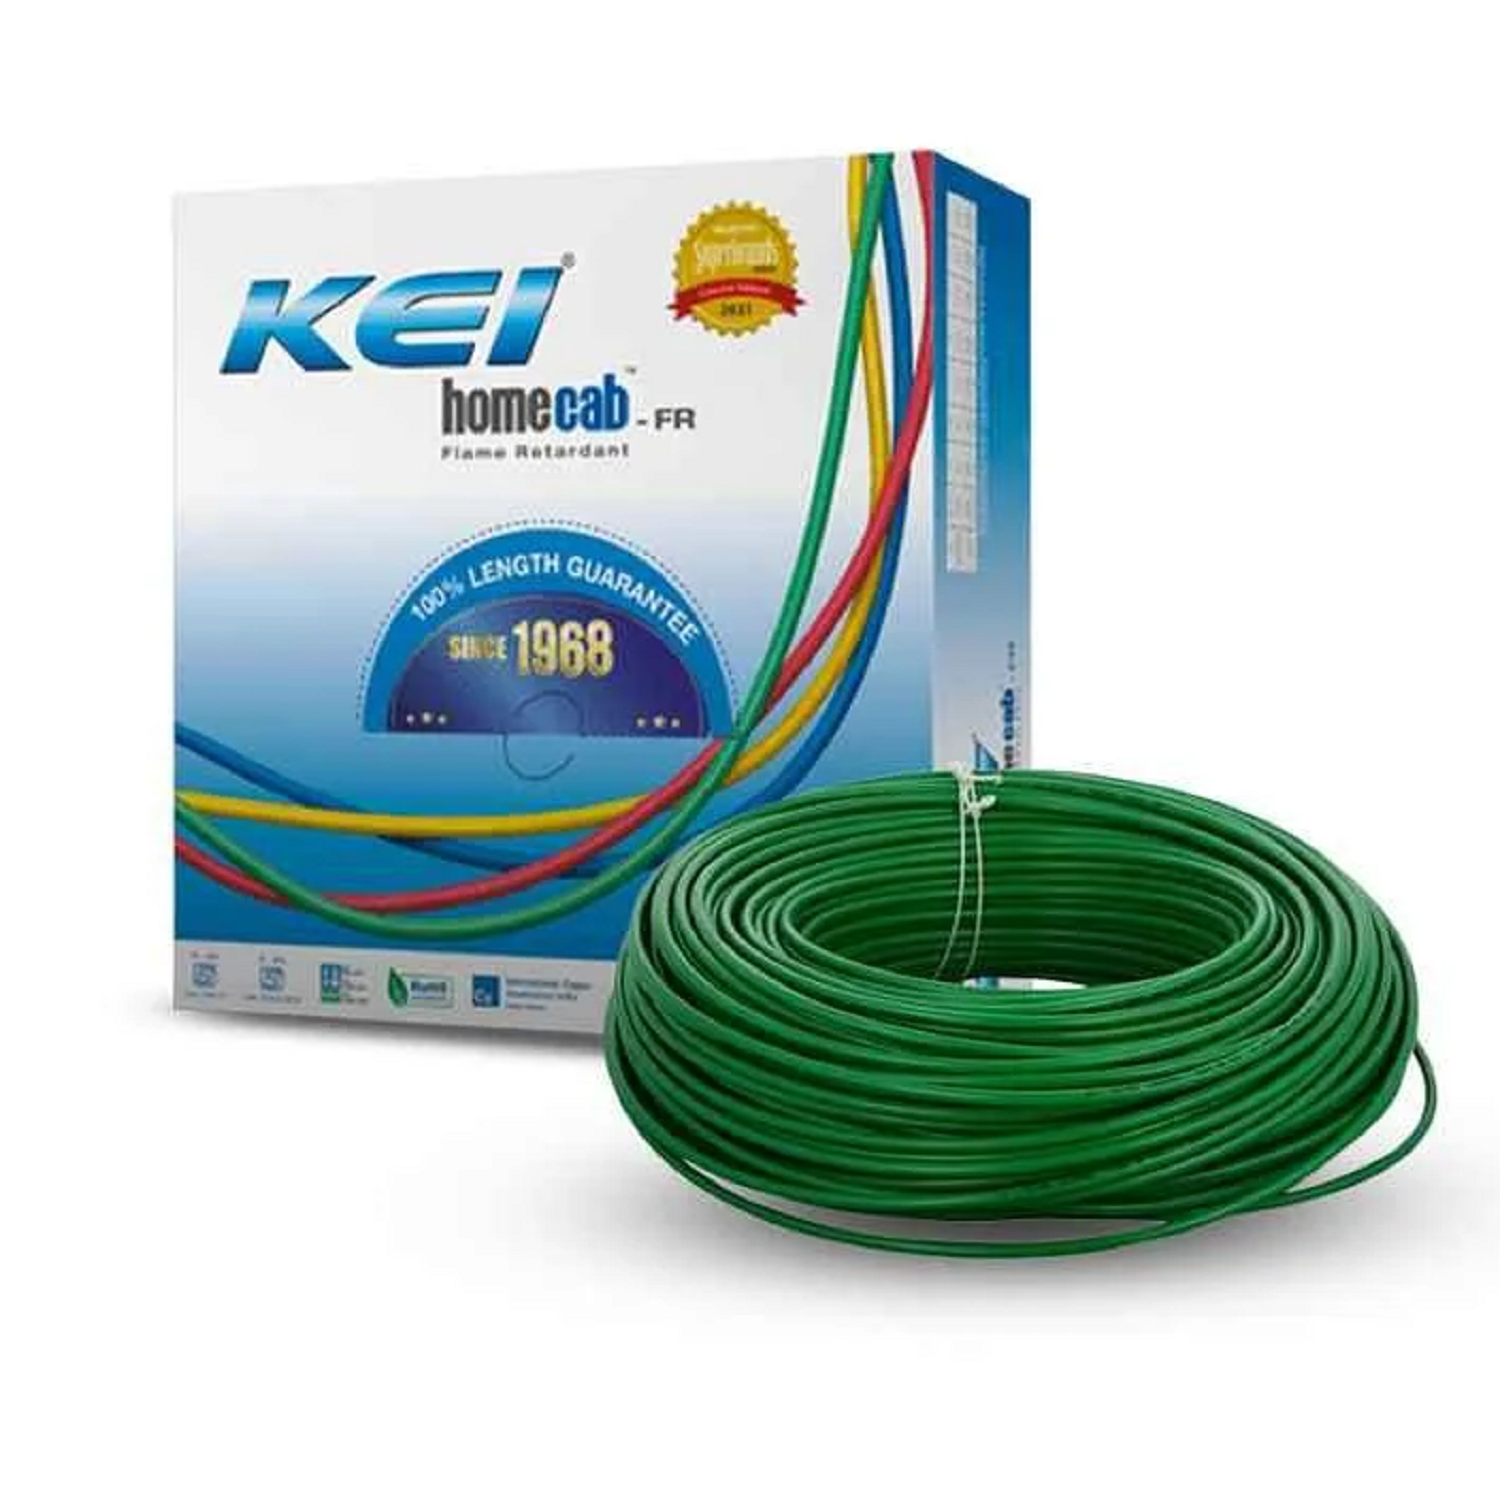 1.5 Sqmm KEI FR Single Core Copper Wire (90 Mtr) With PVC Insulated for House 38 Industrial Uses (Gr